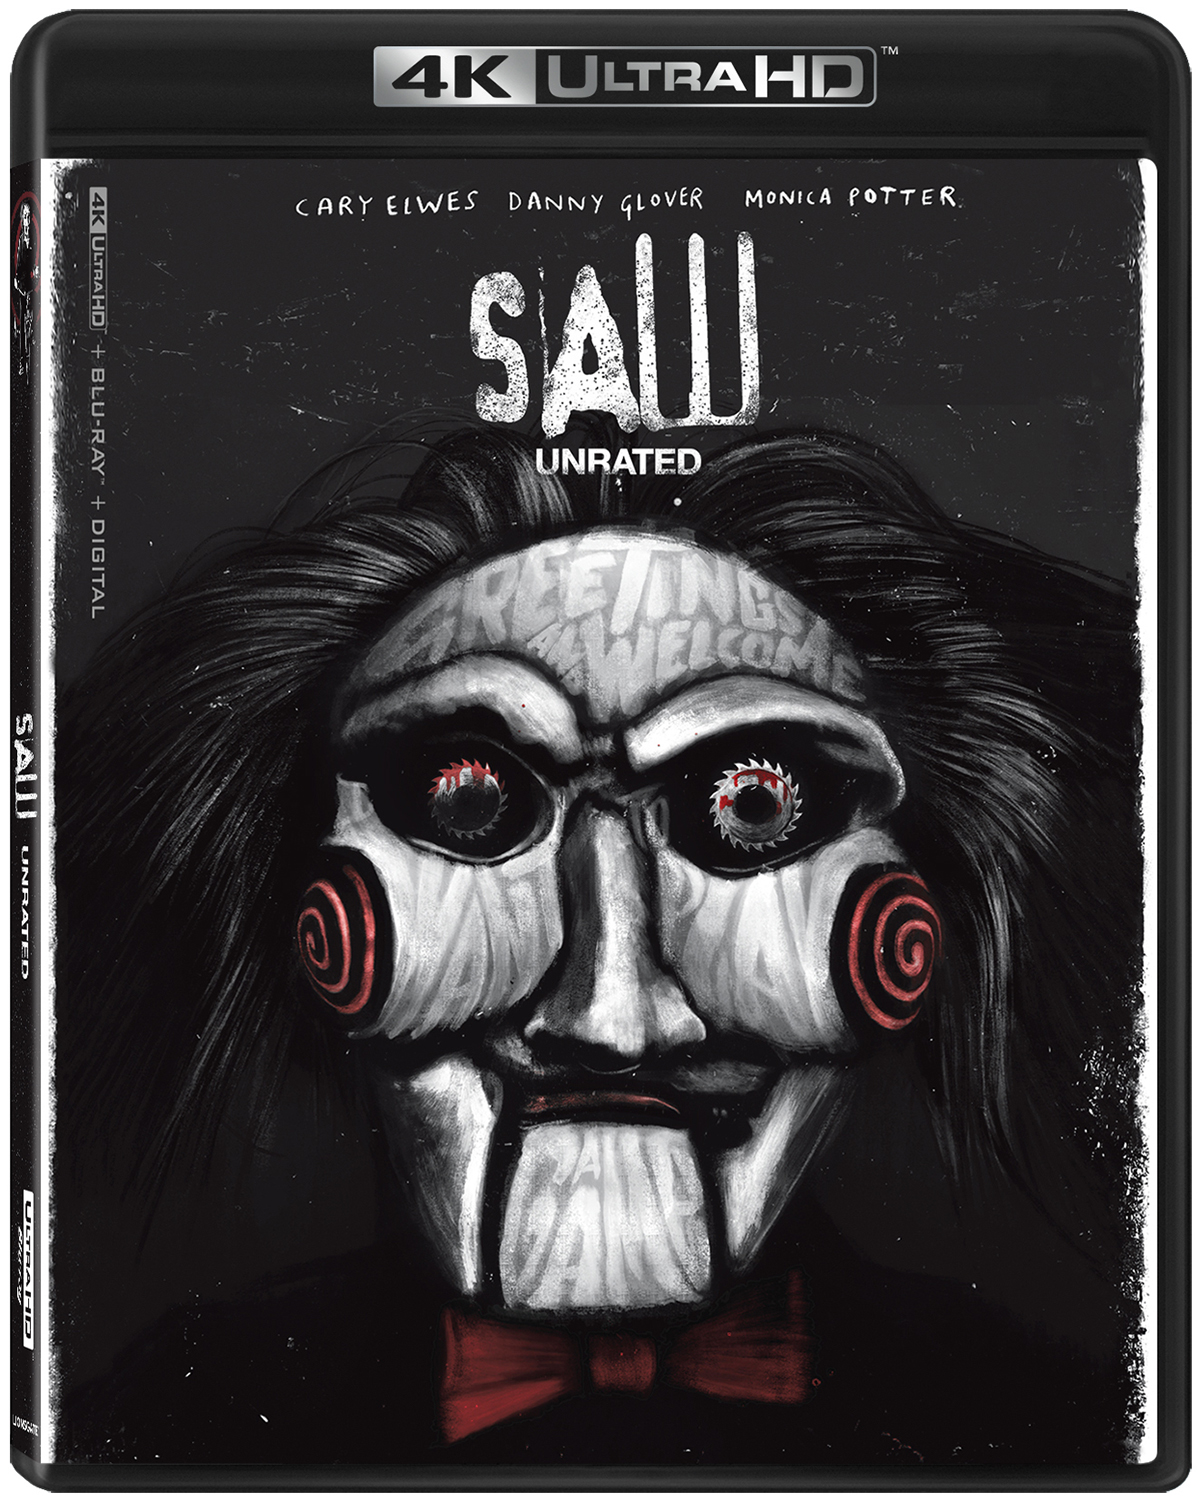 SAW arrives on 4K Ultra HD™ Combo Pack (plus Blu-ray™ and Digital) May 11 from Lionsgate.